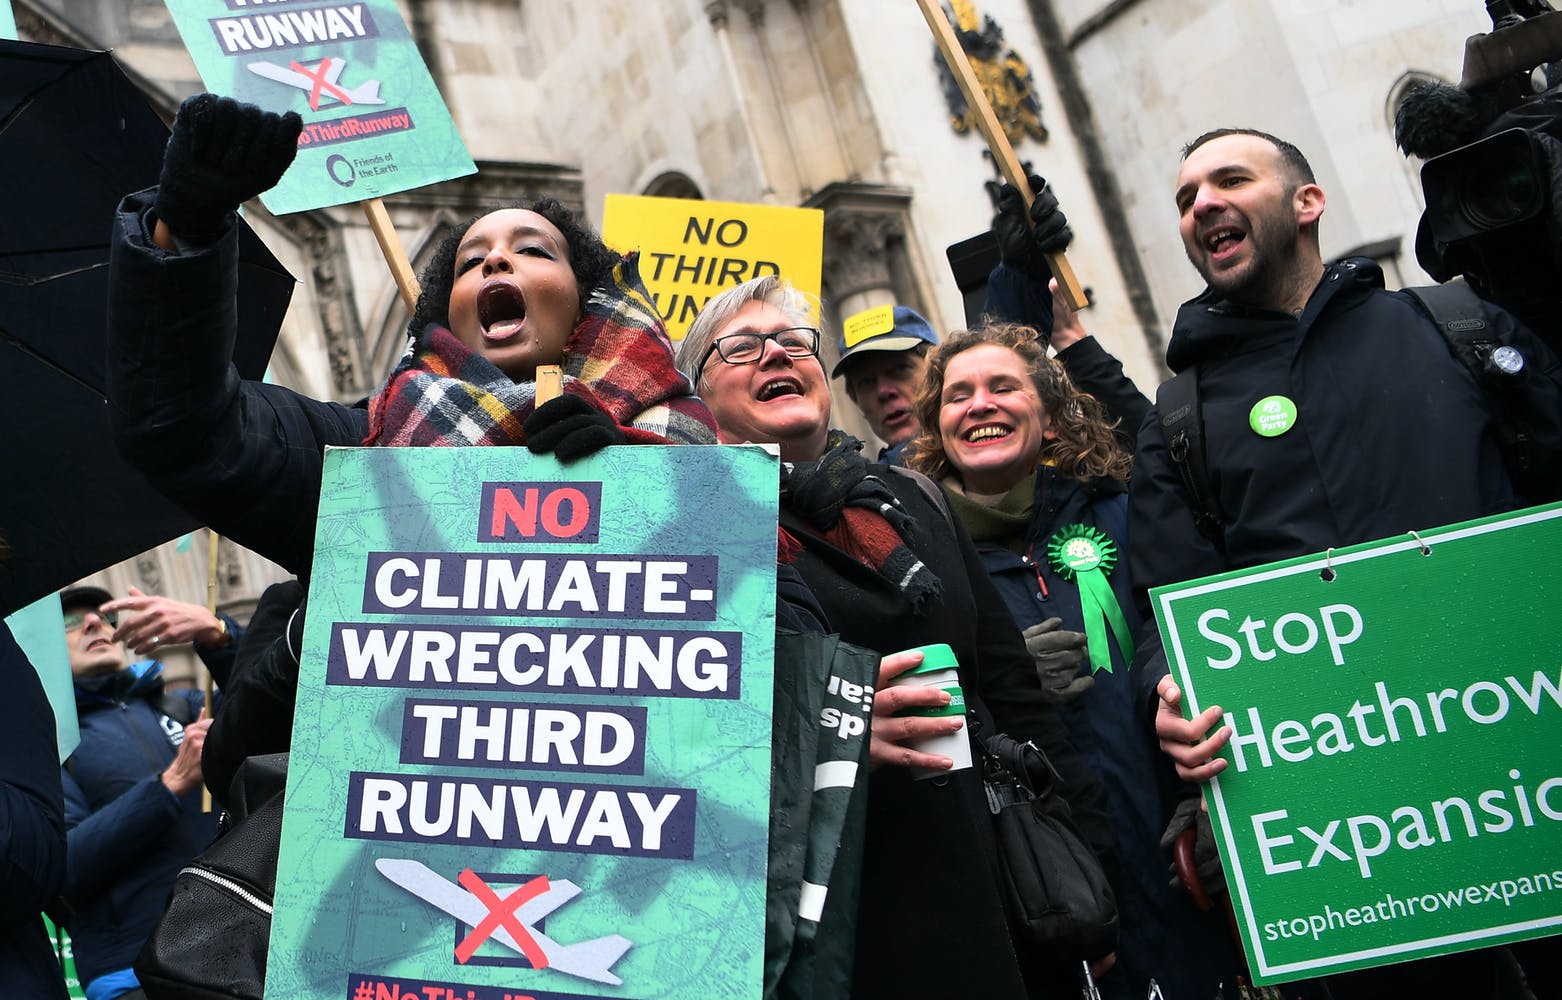 Heathrow’s third runway: how dogged persistence stopped London airport expansion